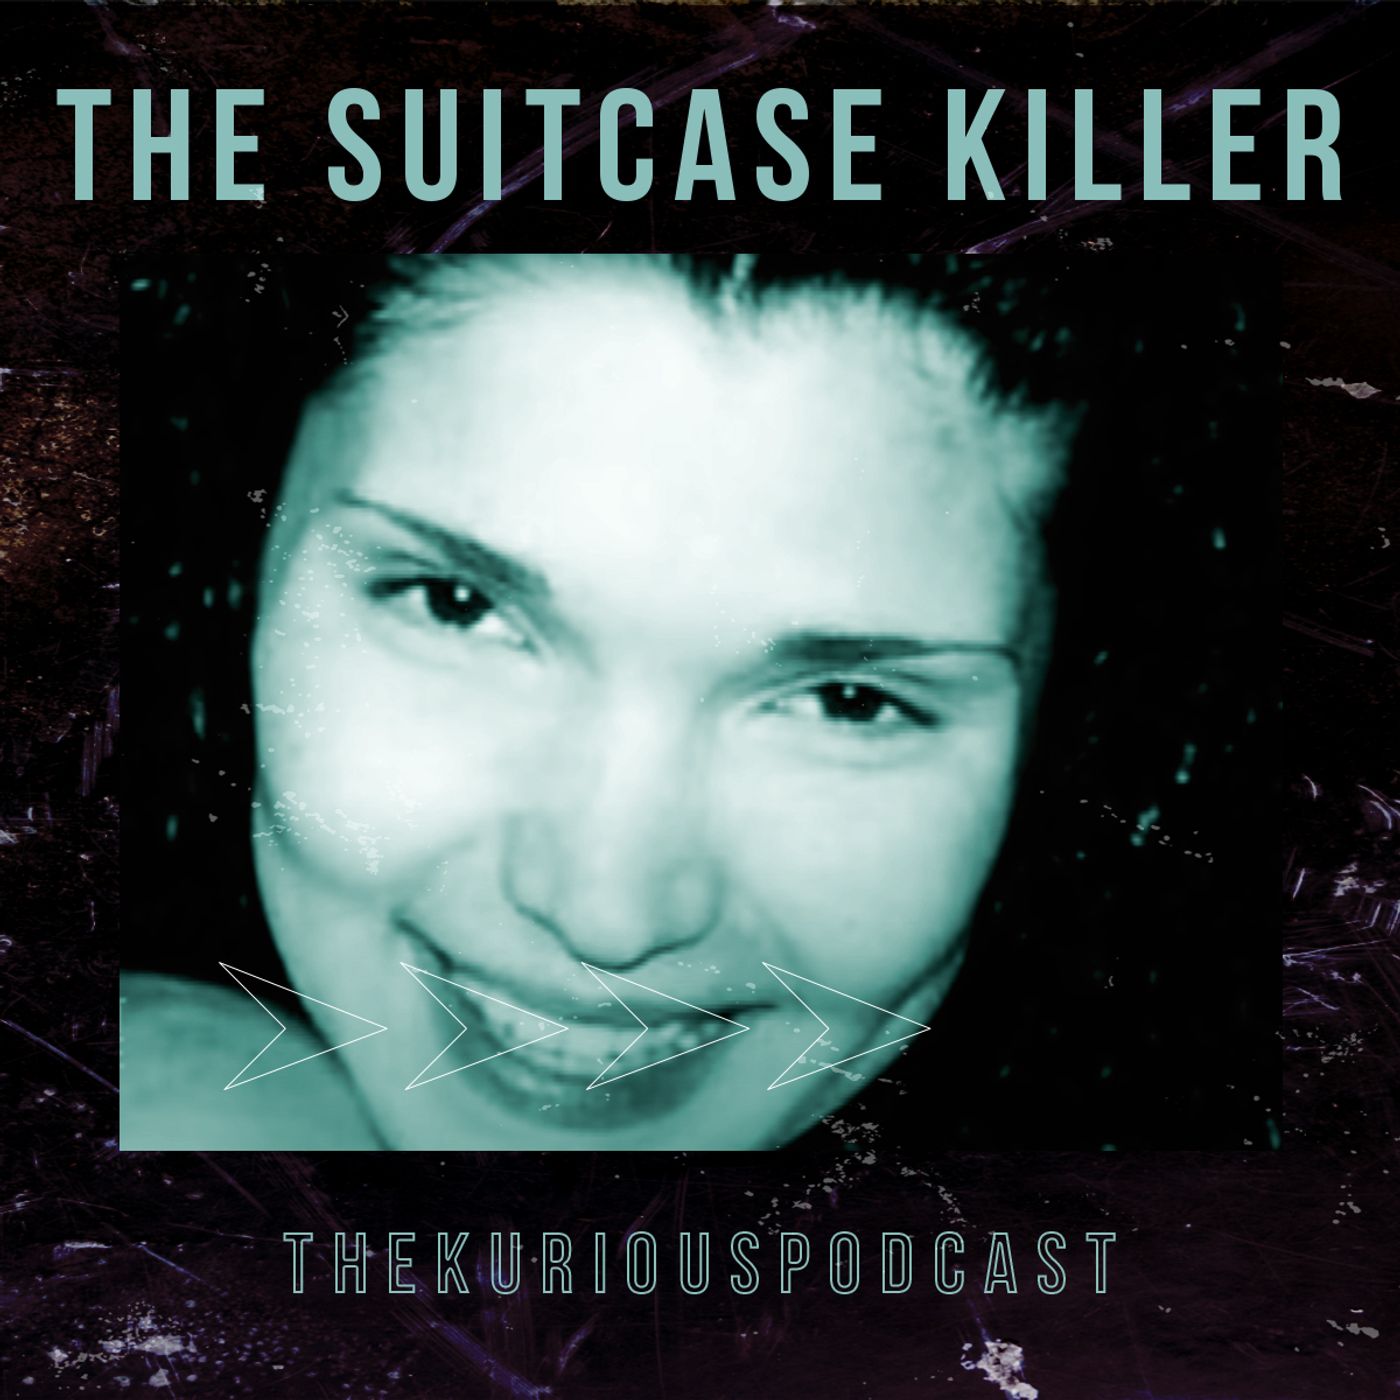 The Case Of Melanie McGuire AKA The Suitcase Killer - Was She Guilty ...